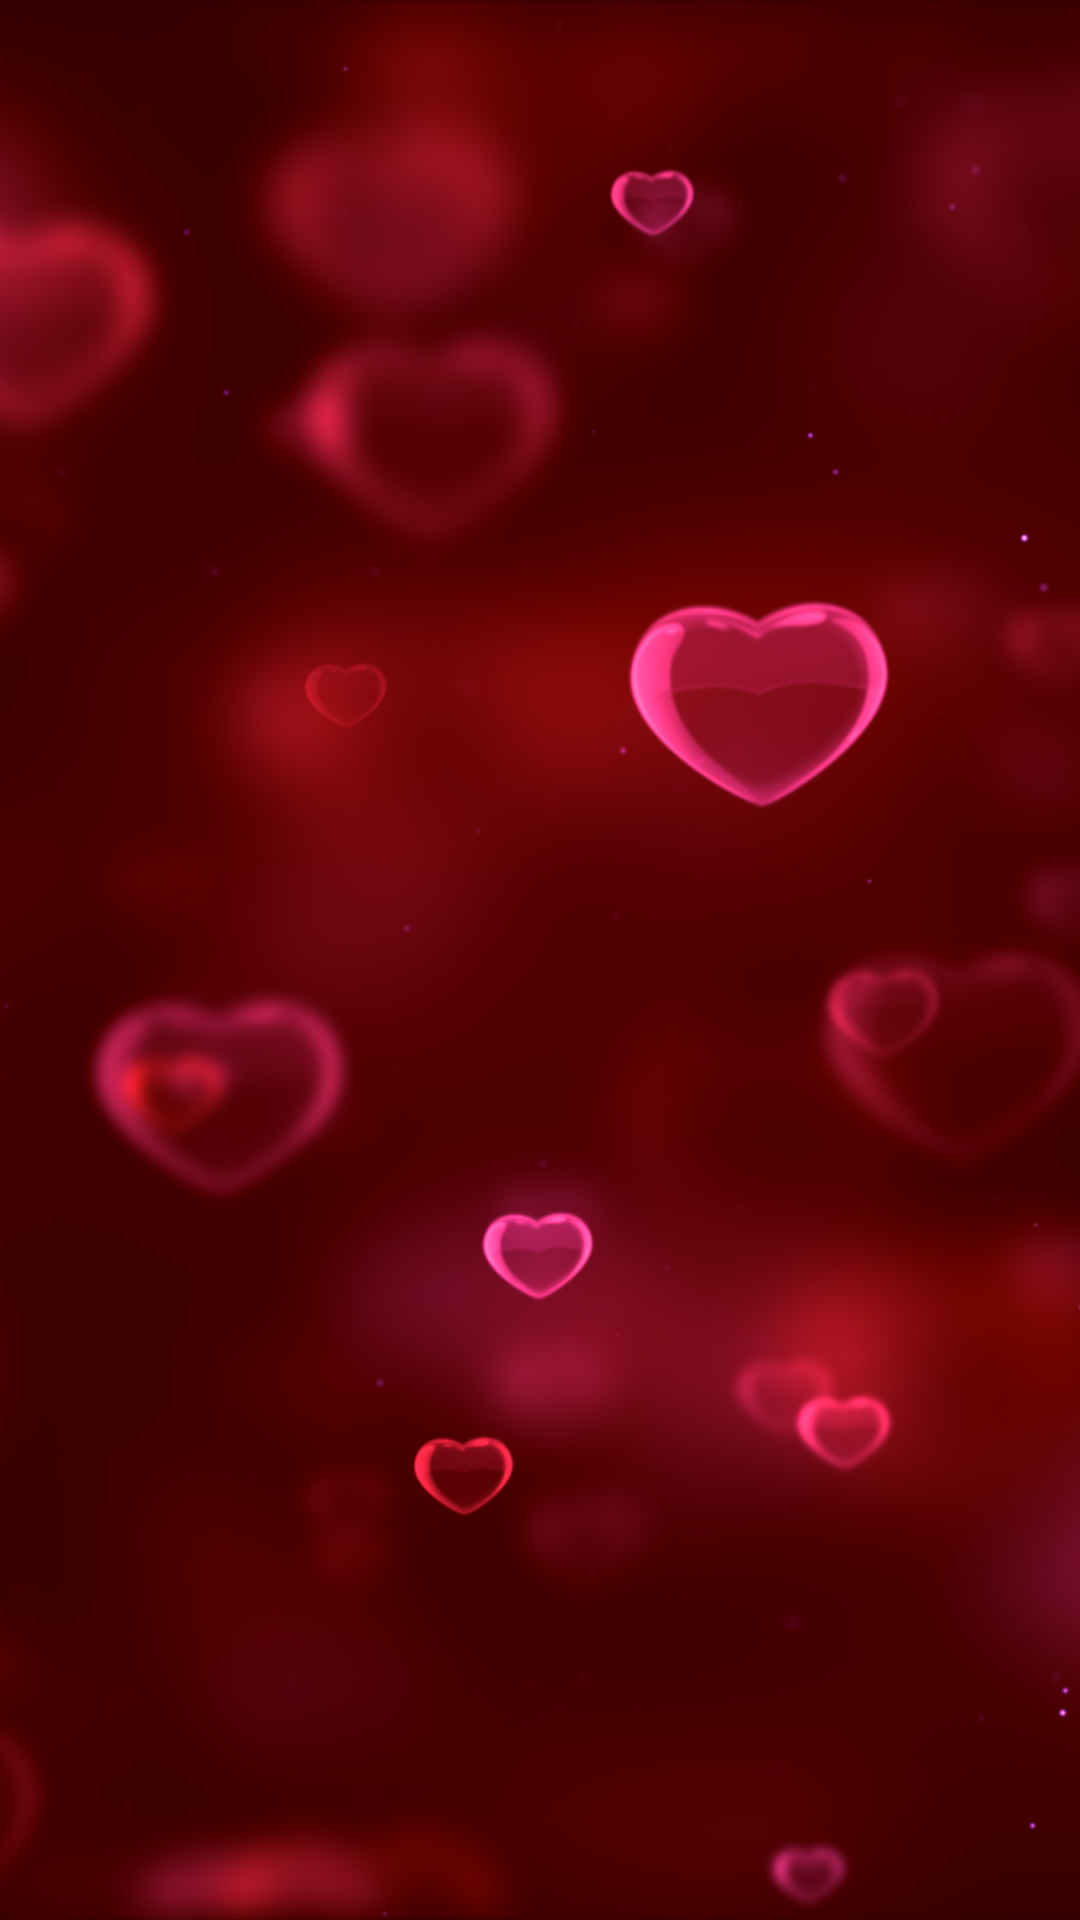 Download wallpaper 938x1668 hearts red black background iphone 876s6  for parallax hd background